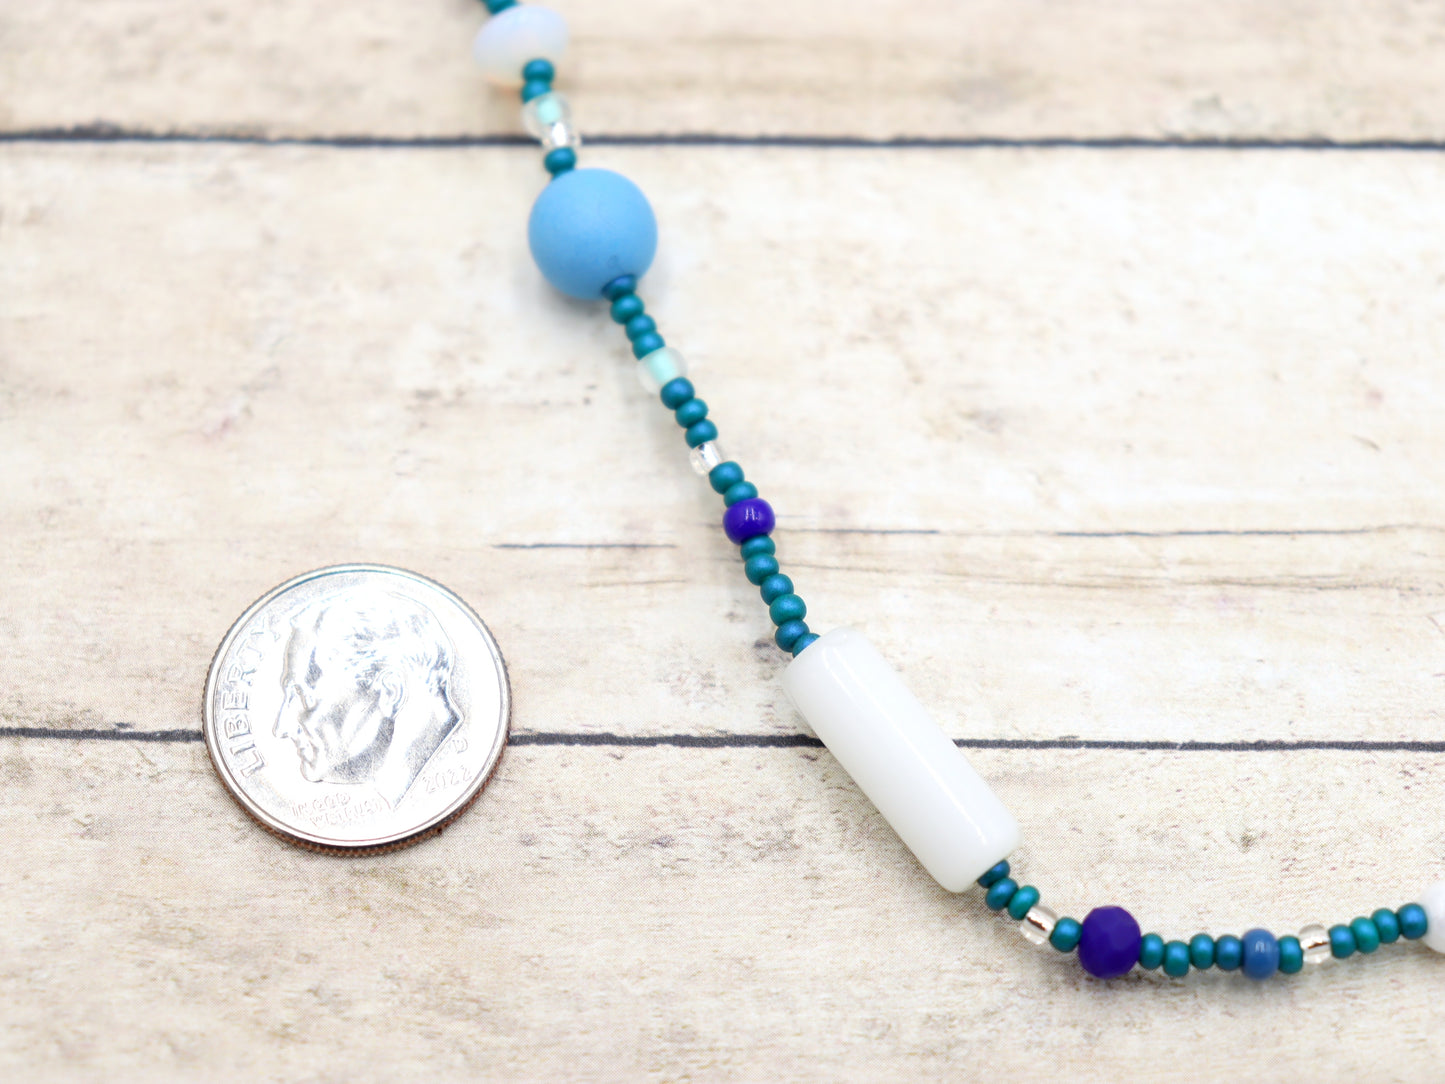 This Necklace with Blue You Away – Blue and White 38” Long Party Necklace by Monkey’s Mojo